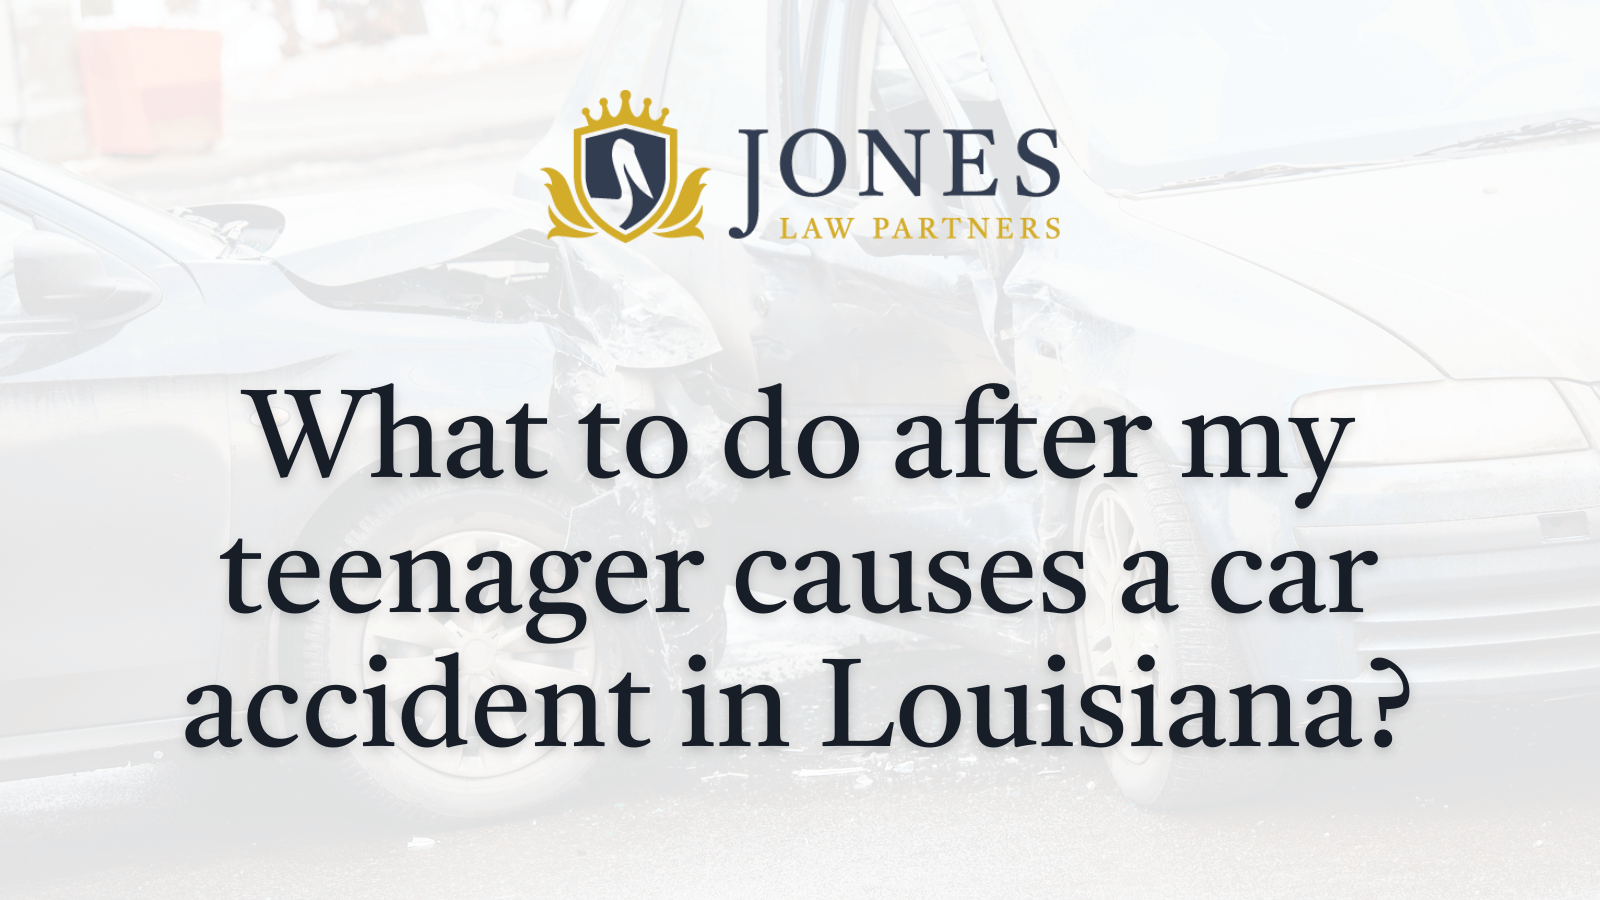 What to do after my teenager causes a car accident in Louisiana - Jones Law Partners - alexandria louisiana